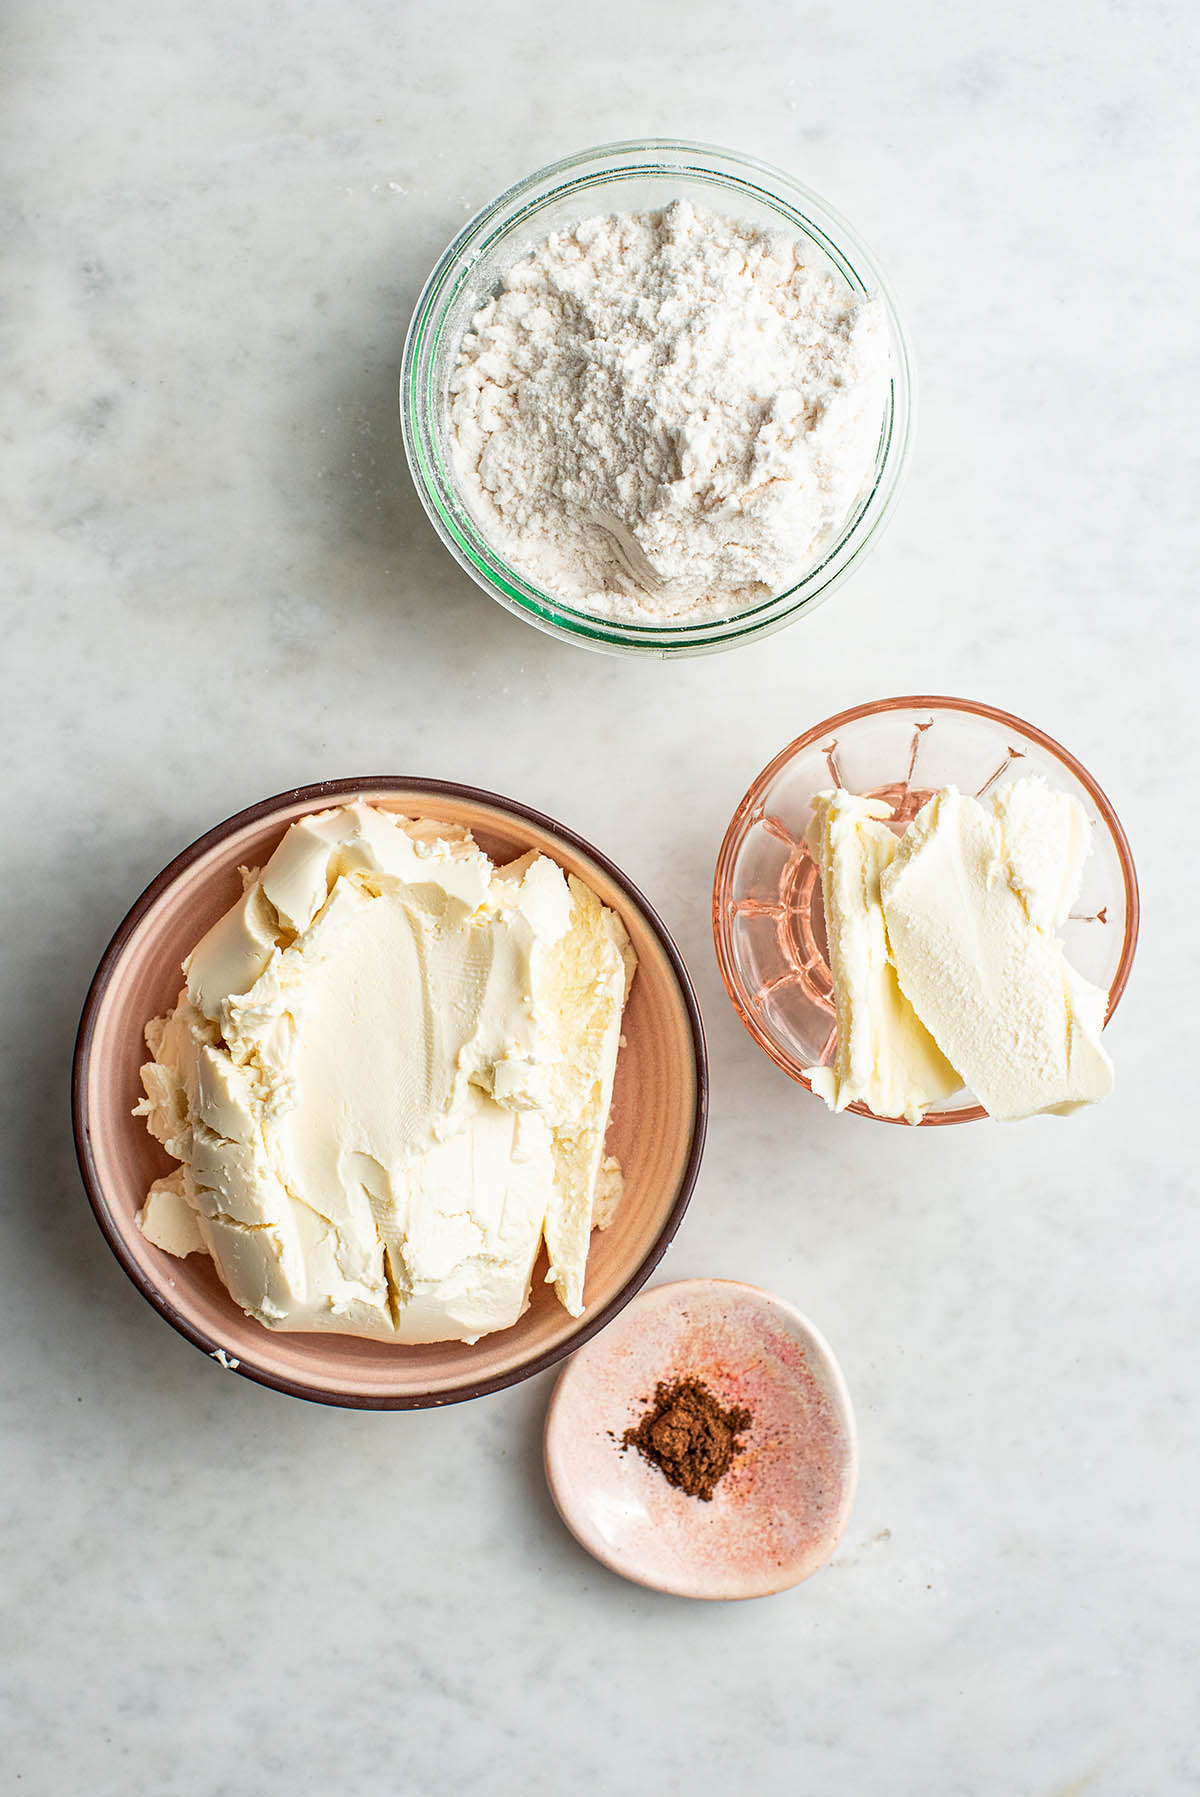 Cream cheese frosting ingredients.